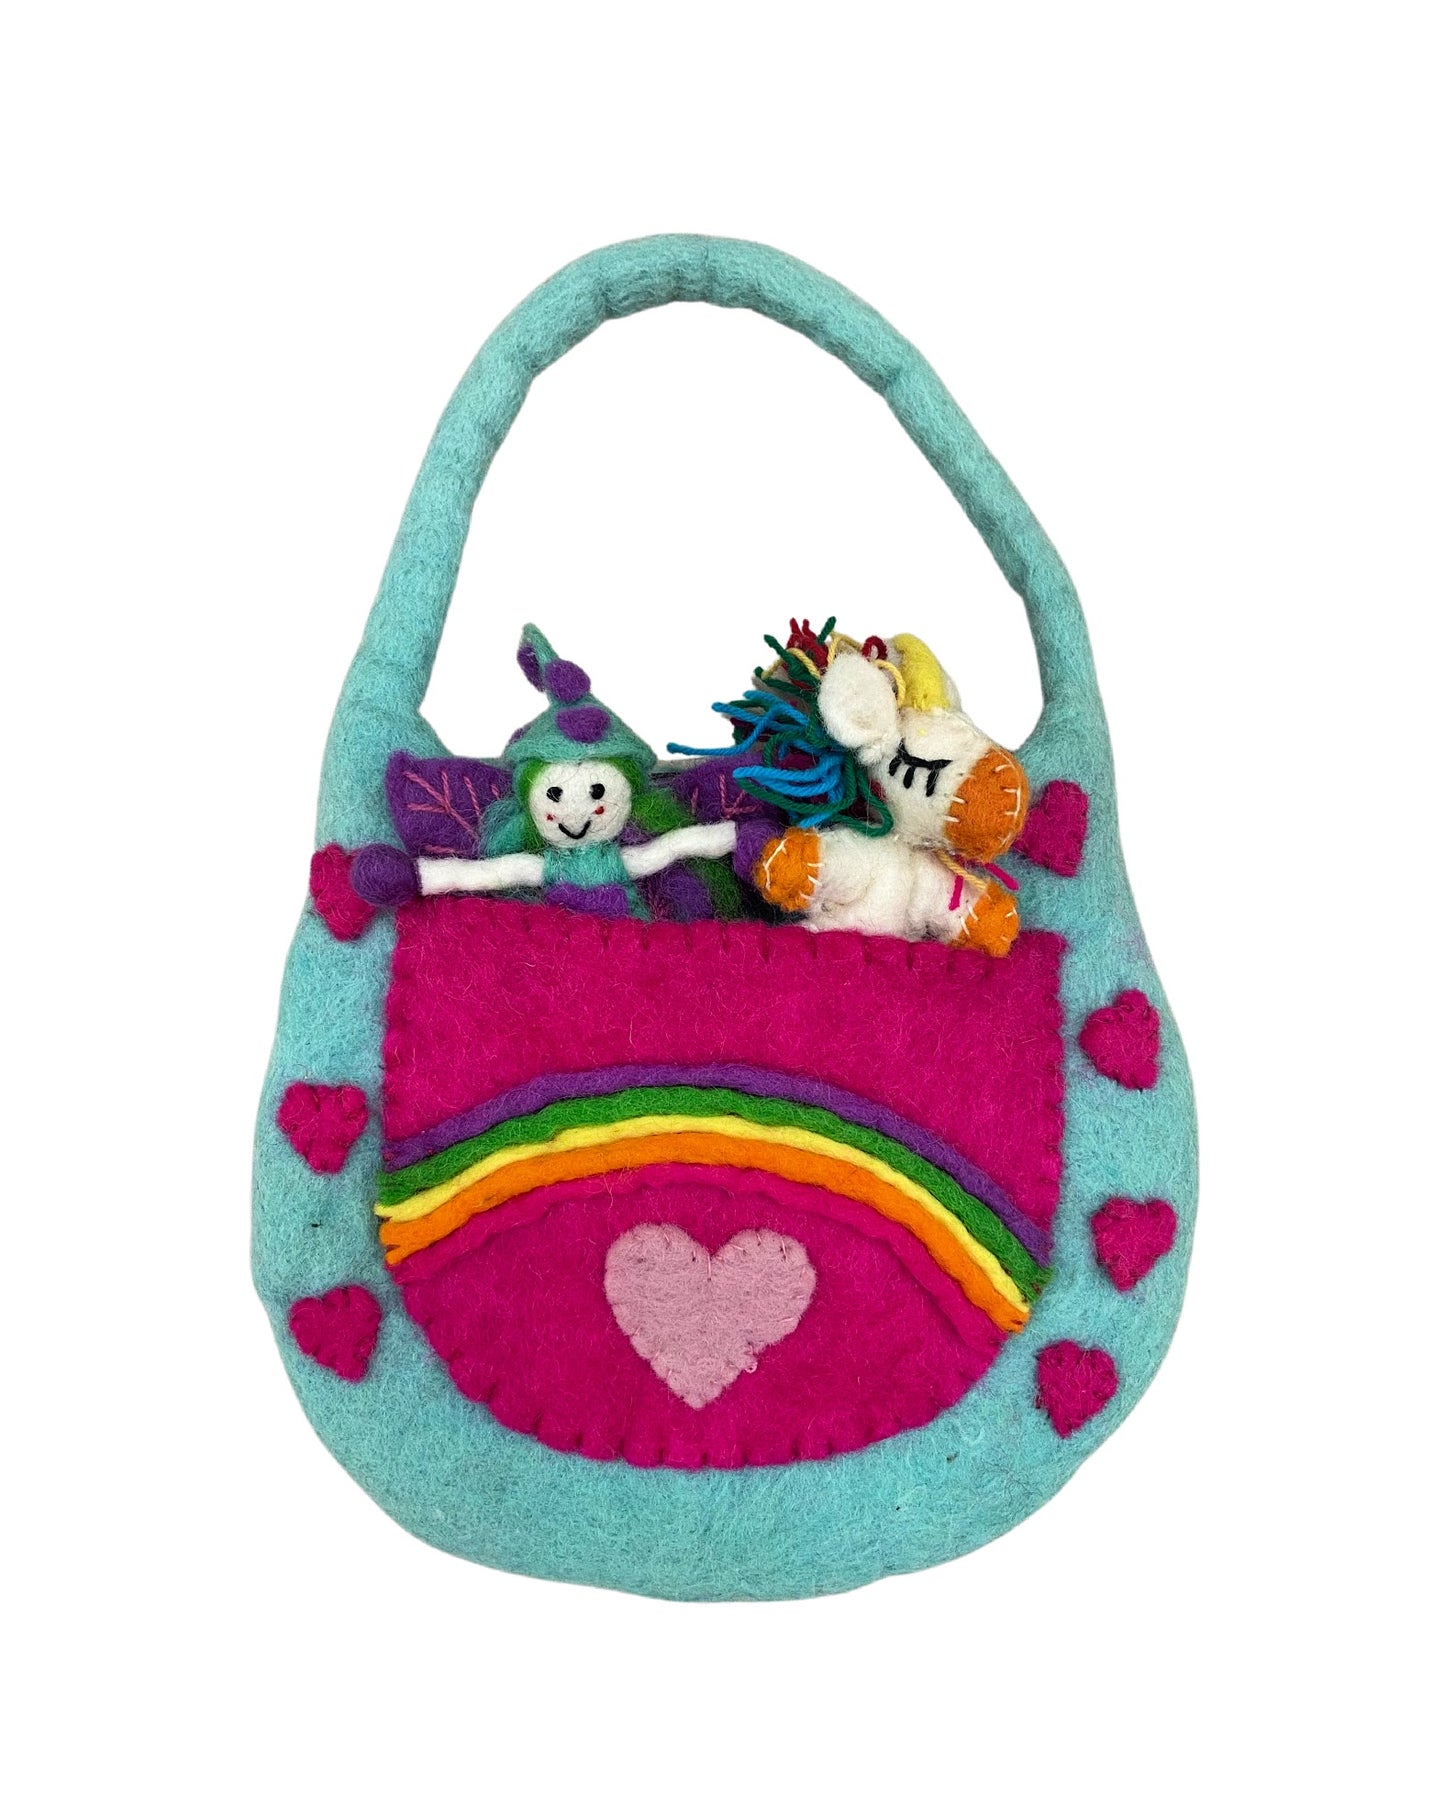 Colourful felted bag for toddlers with rainbow colours, hearts and a small doll